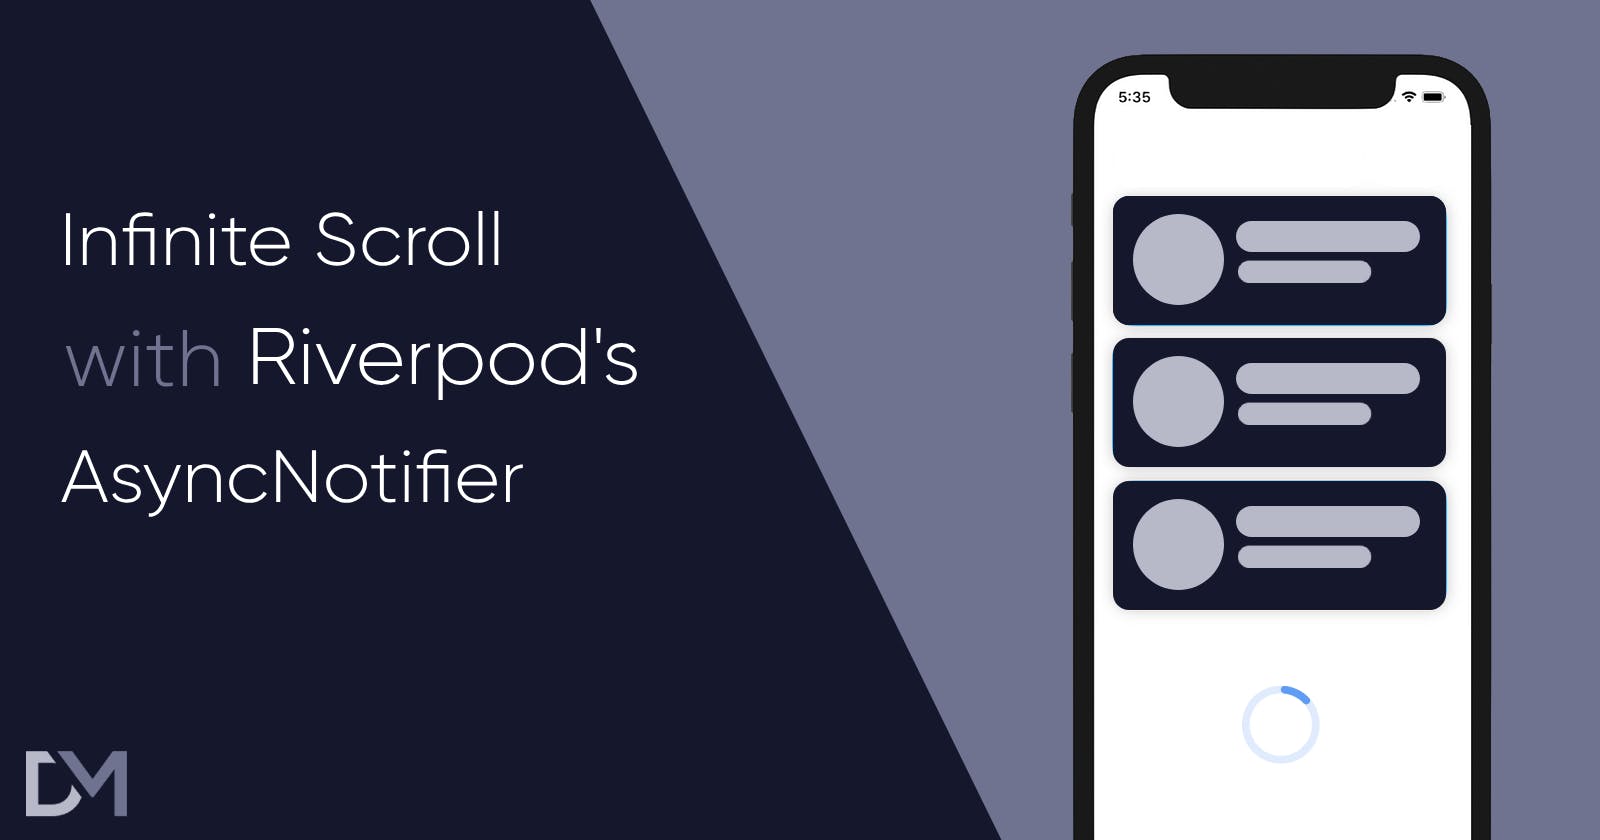 Implementing Infinite Scroll with Riverpod's AsyncNotifier